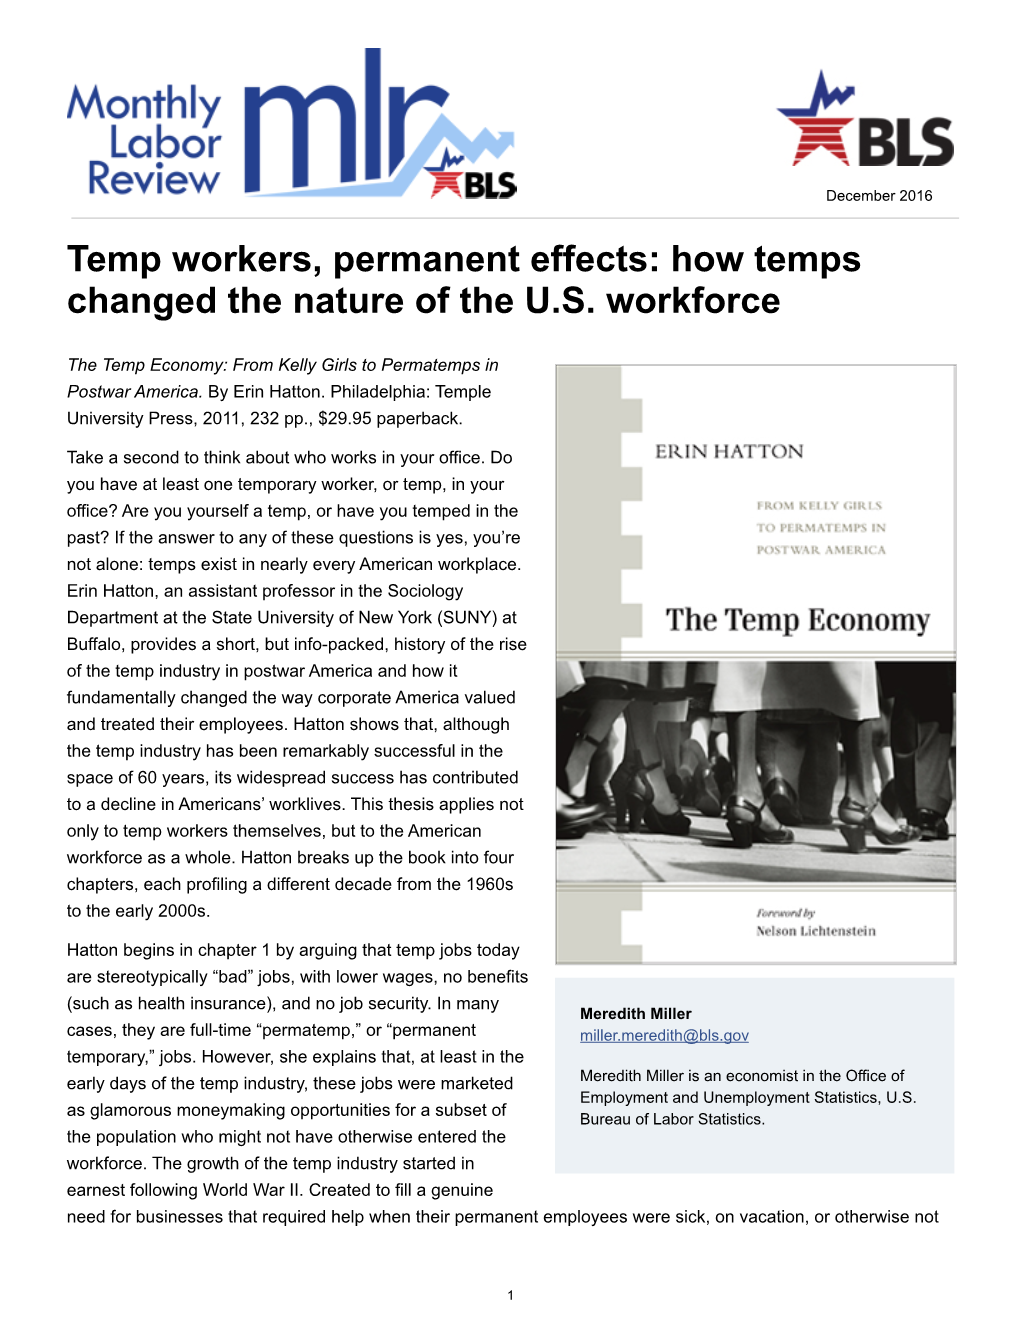 Temp Workers, Permanent Effects: How Temps Changed the Nature of the U.S